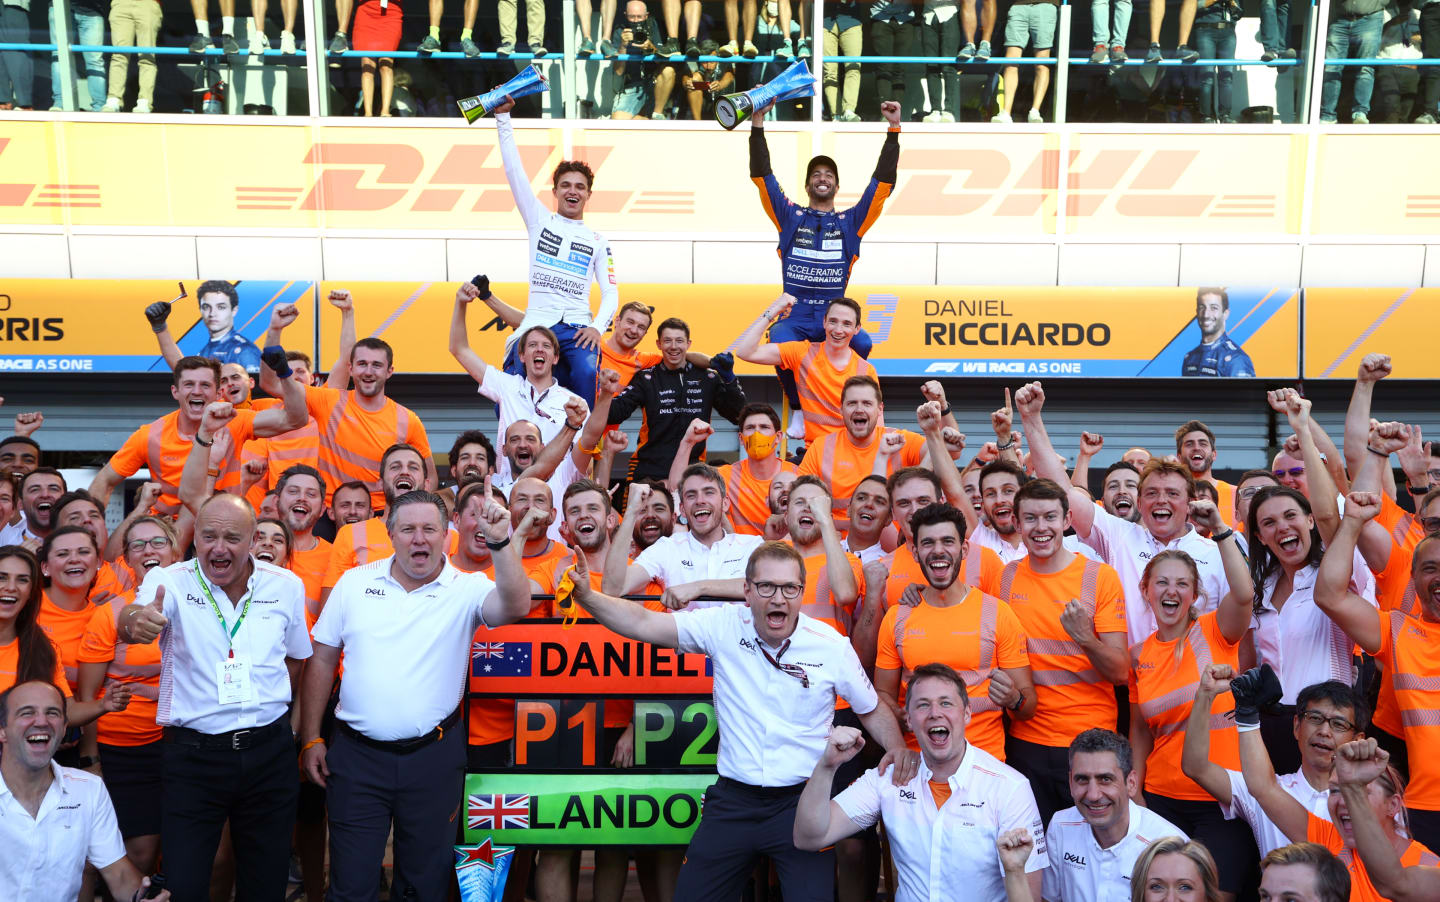 MONZA, ITALY - SEPTEMBER 12: Race winner Daniel Ricciardo of Australia and McLaren F1 and second placed Lando Norris of Great Britain and McLaren F1 celebrate with their team after the F1 Grand Prix of Italy at Autodromo di Monza on September 12, 2021 in Monza, Italy. (Photo by Bryn Lennon/Getty Images)